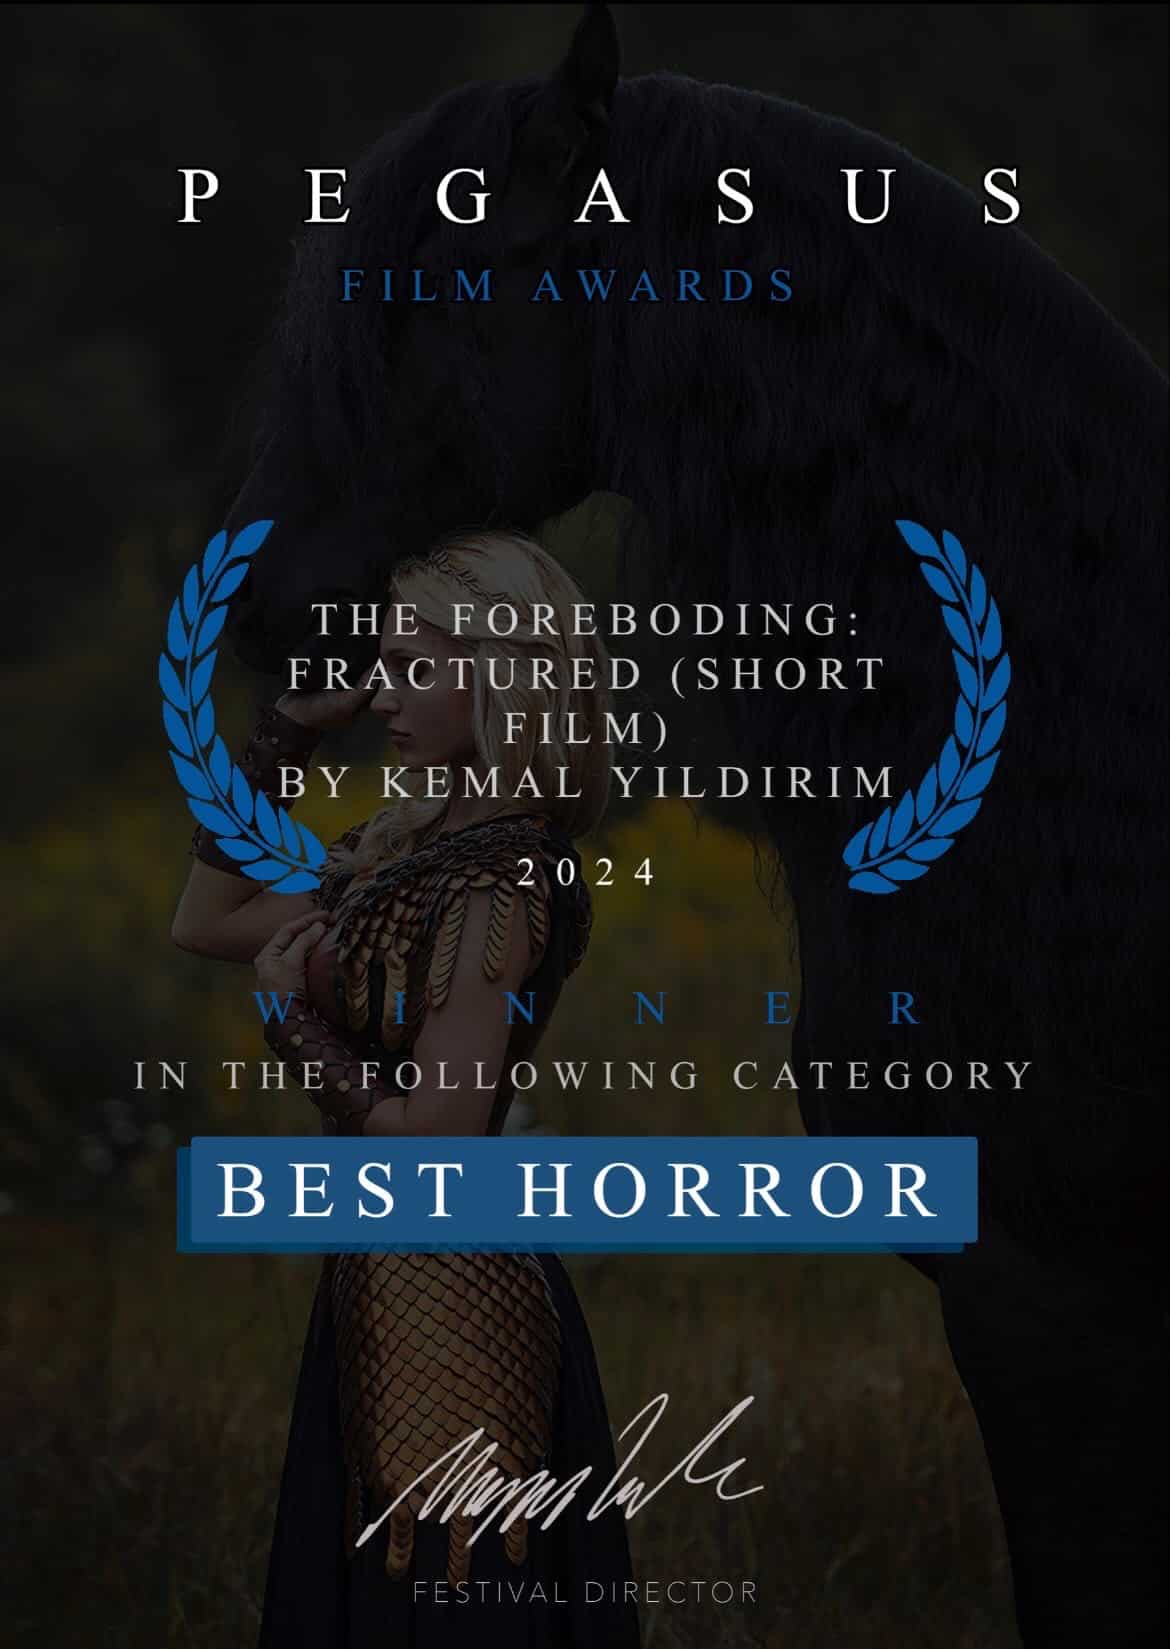 A poster depicting the winner of the Pegasus film award. The Foreboding: Fractured.